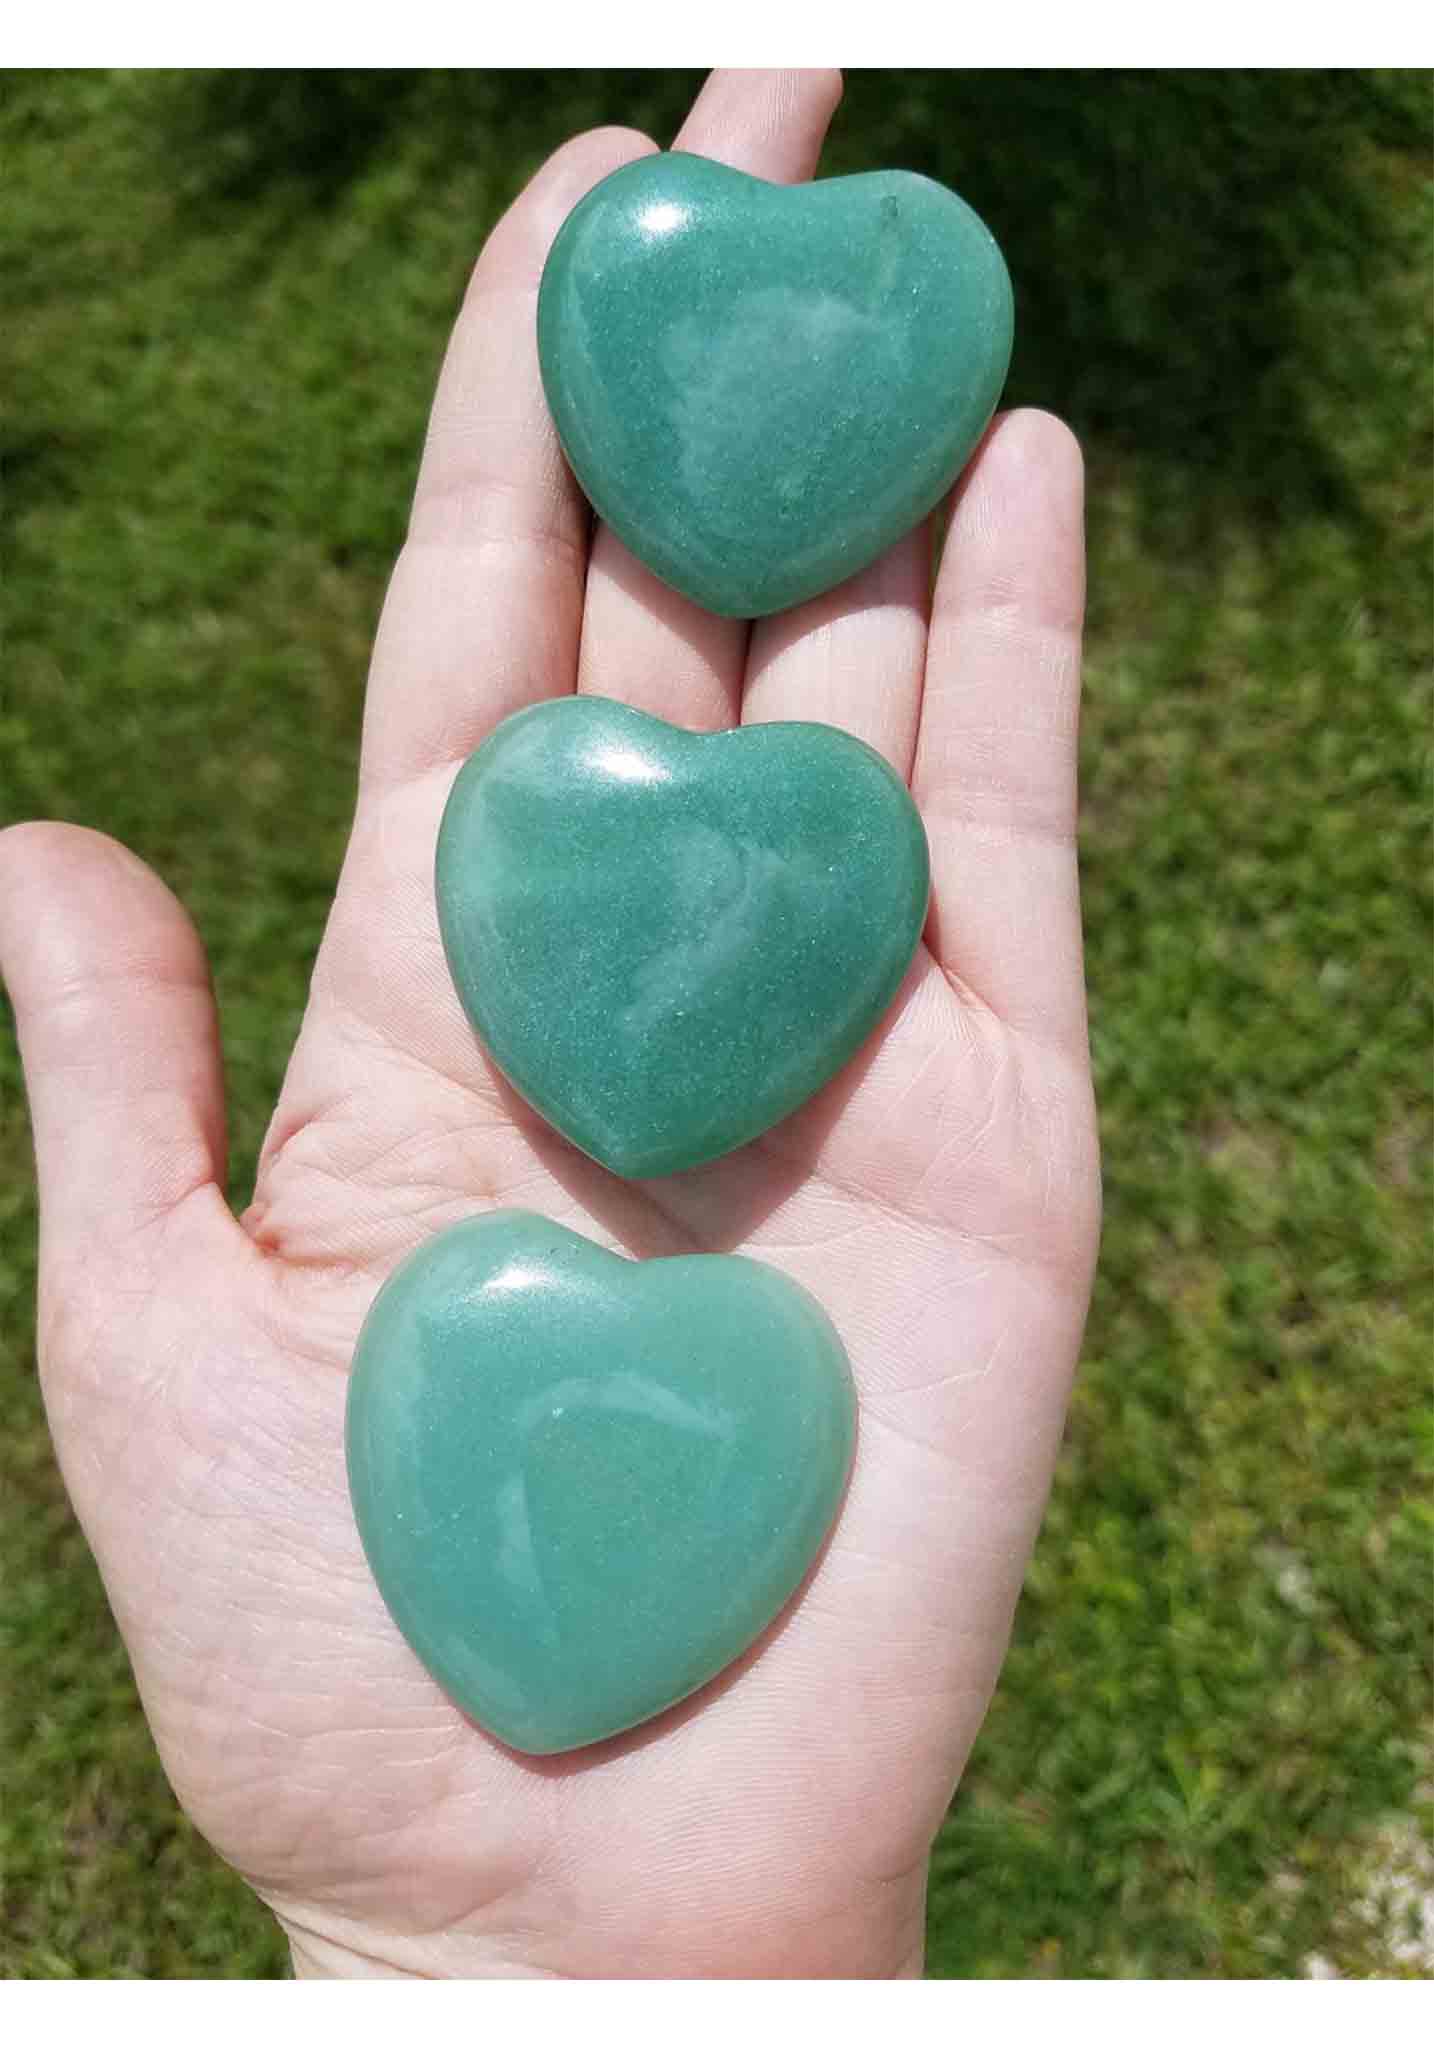 How Should Married Couples Use Aventurine Stone?